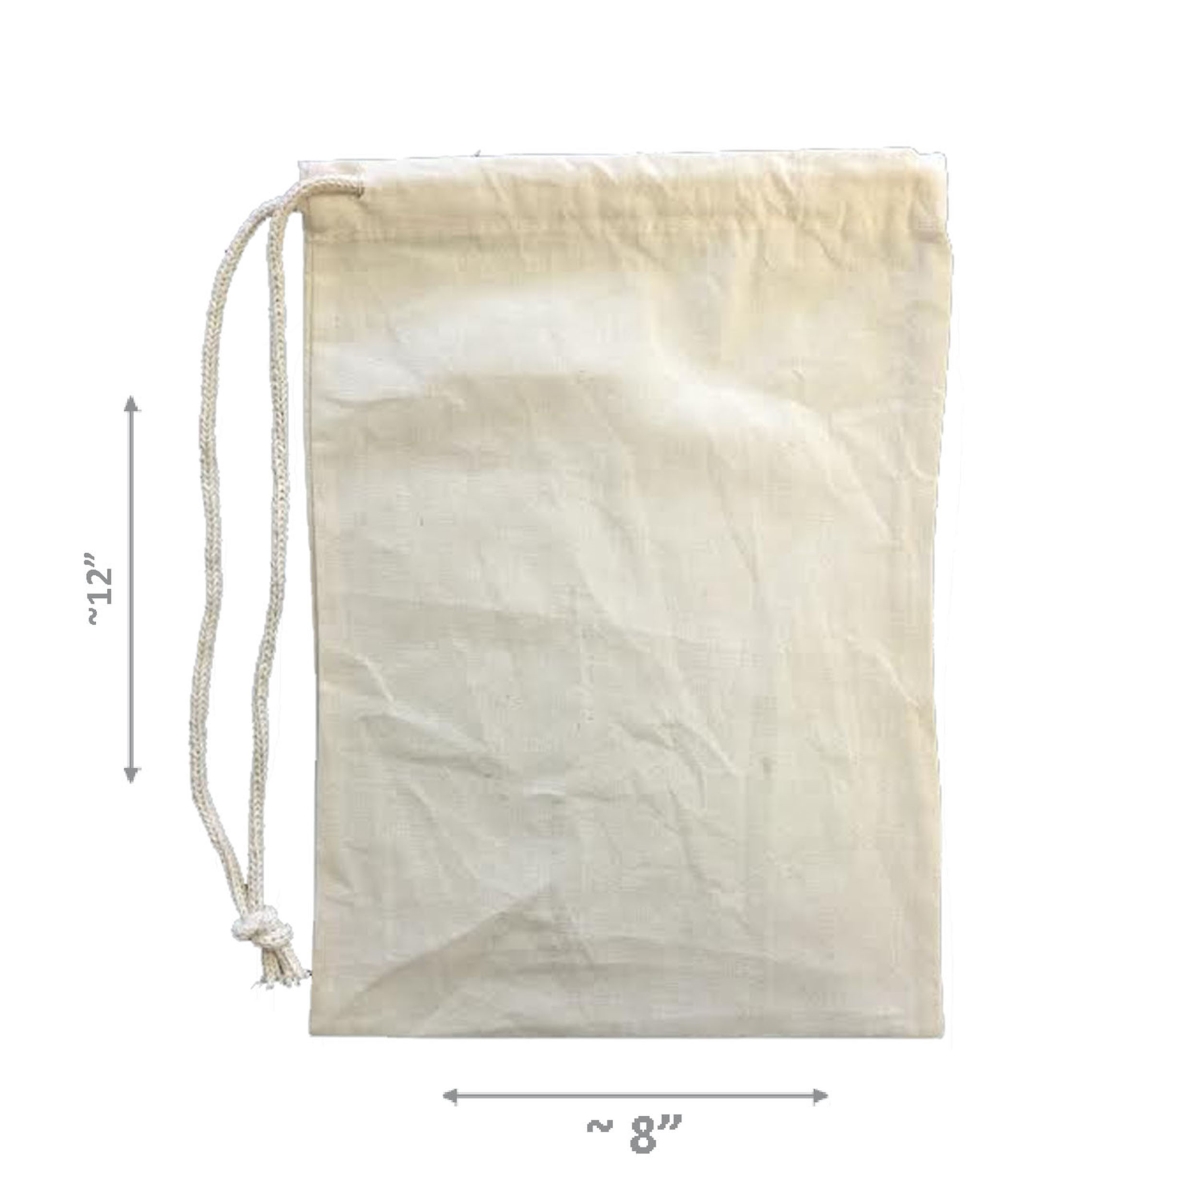 Muslinbag8x12-pack1 100 Percent Cotton Durable Drawstring Muslin Produce Storage Bags, Natural - 8 X 12 In.